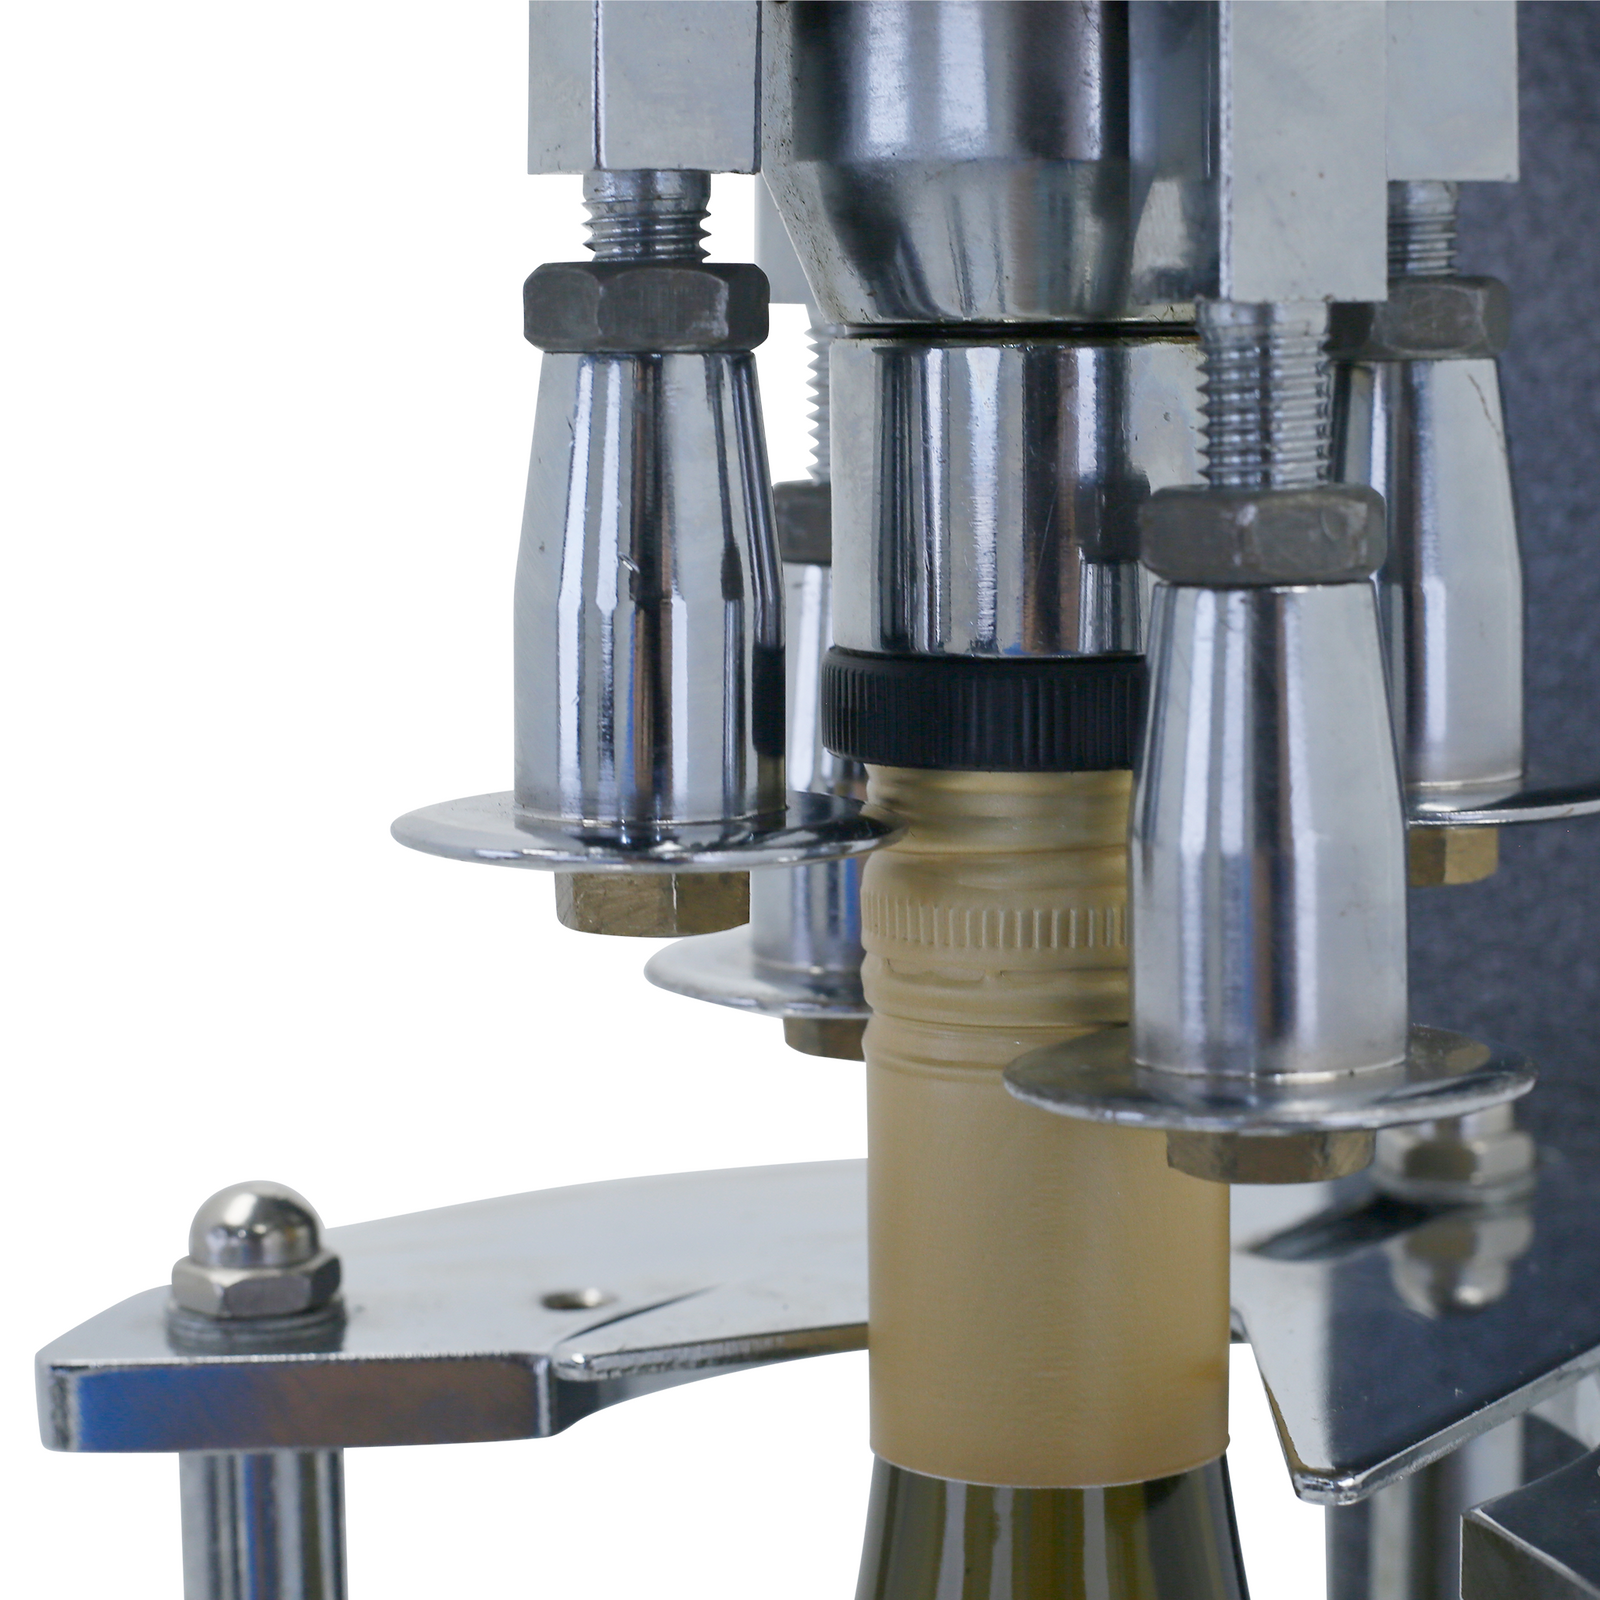 close of capping components on grey bottle capper with a gold cap inserted. Te capper is placing the cap on the top of the bottle.